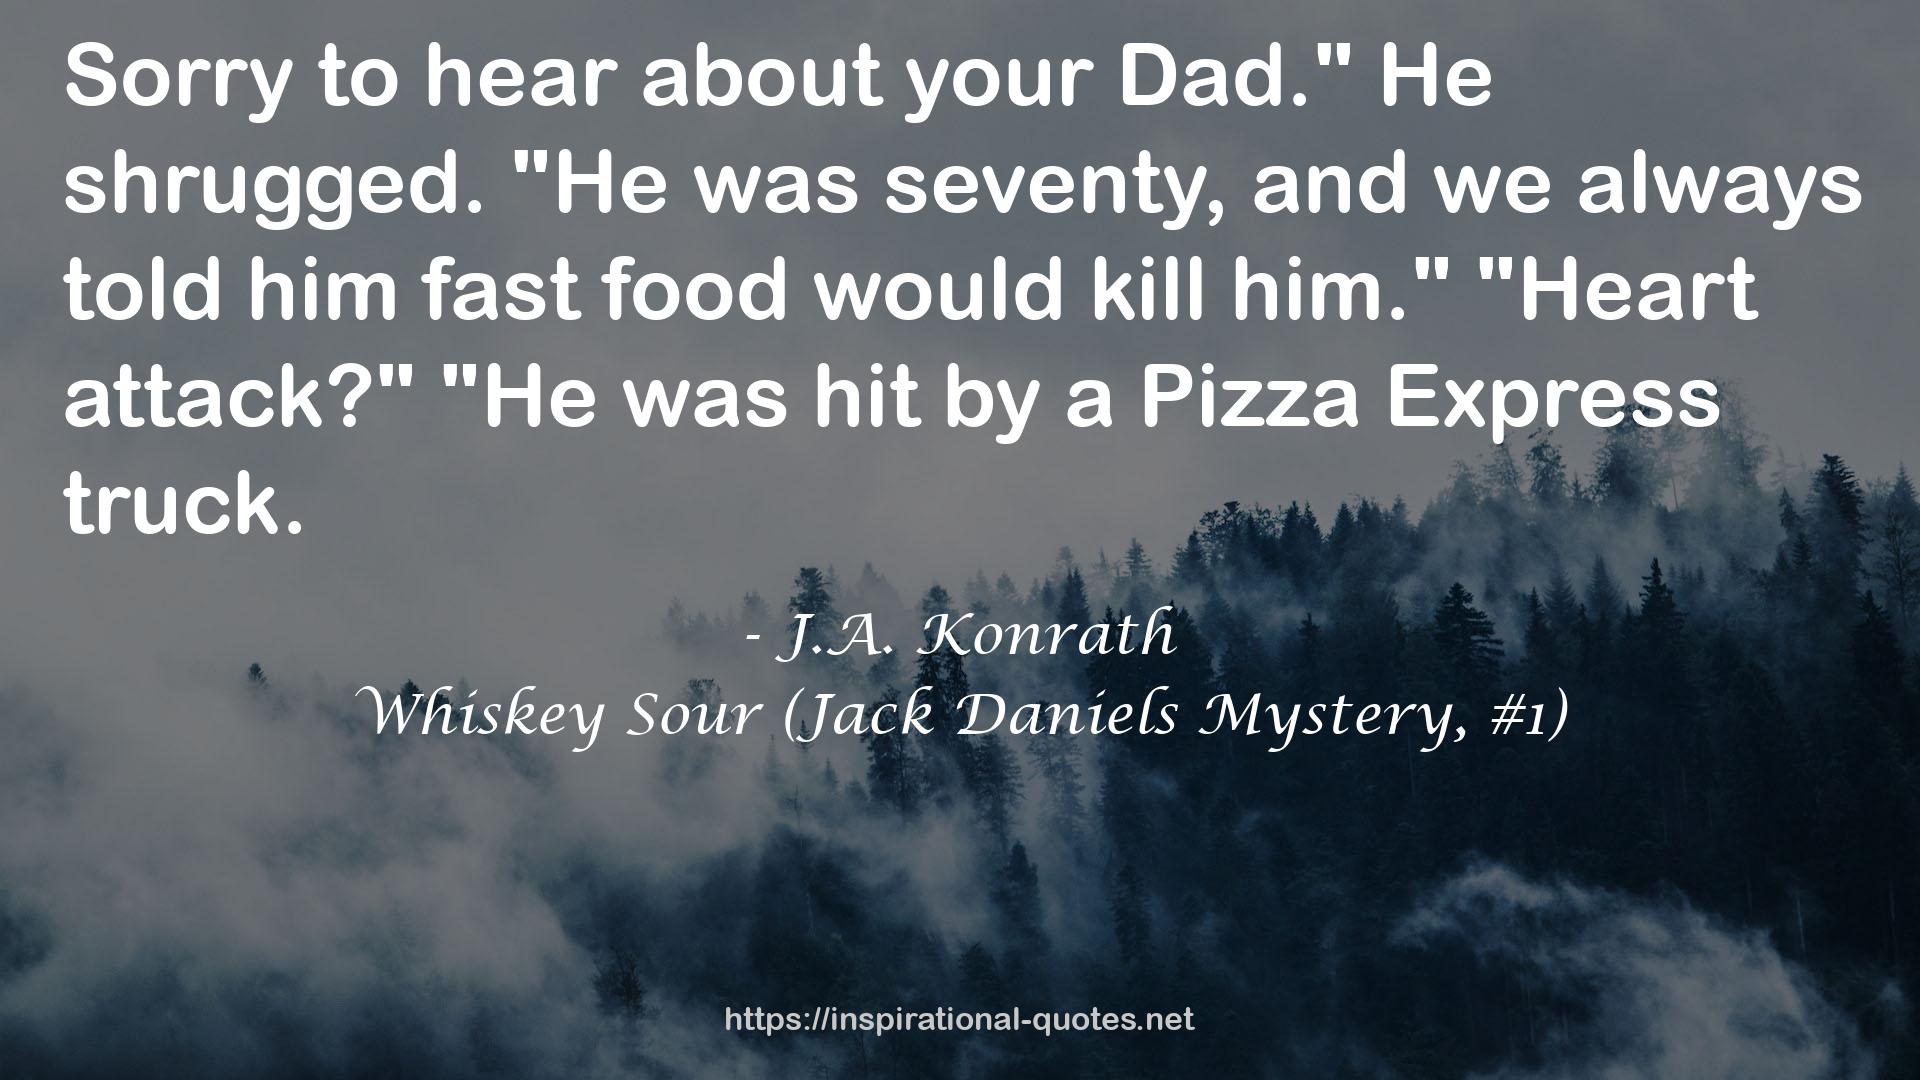 Whiskey Sour (Jack Daniels Mystery, #1) QUOTES